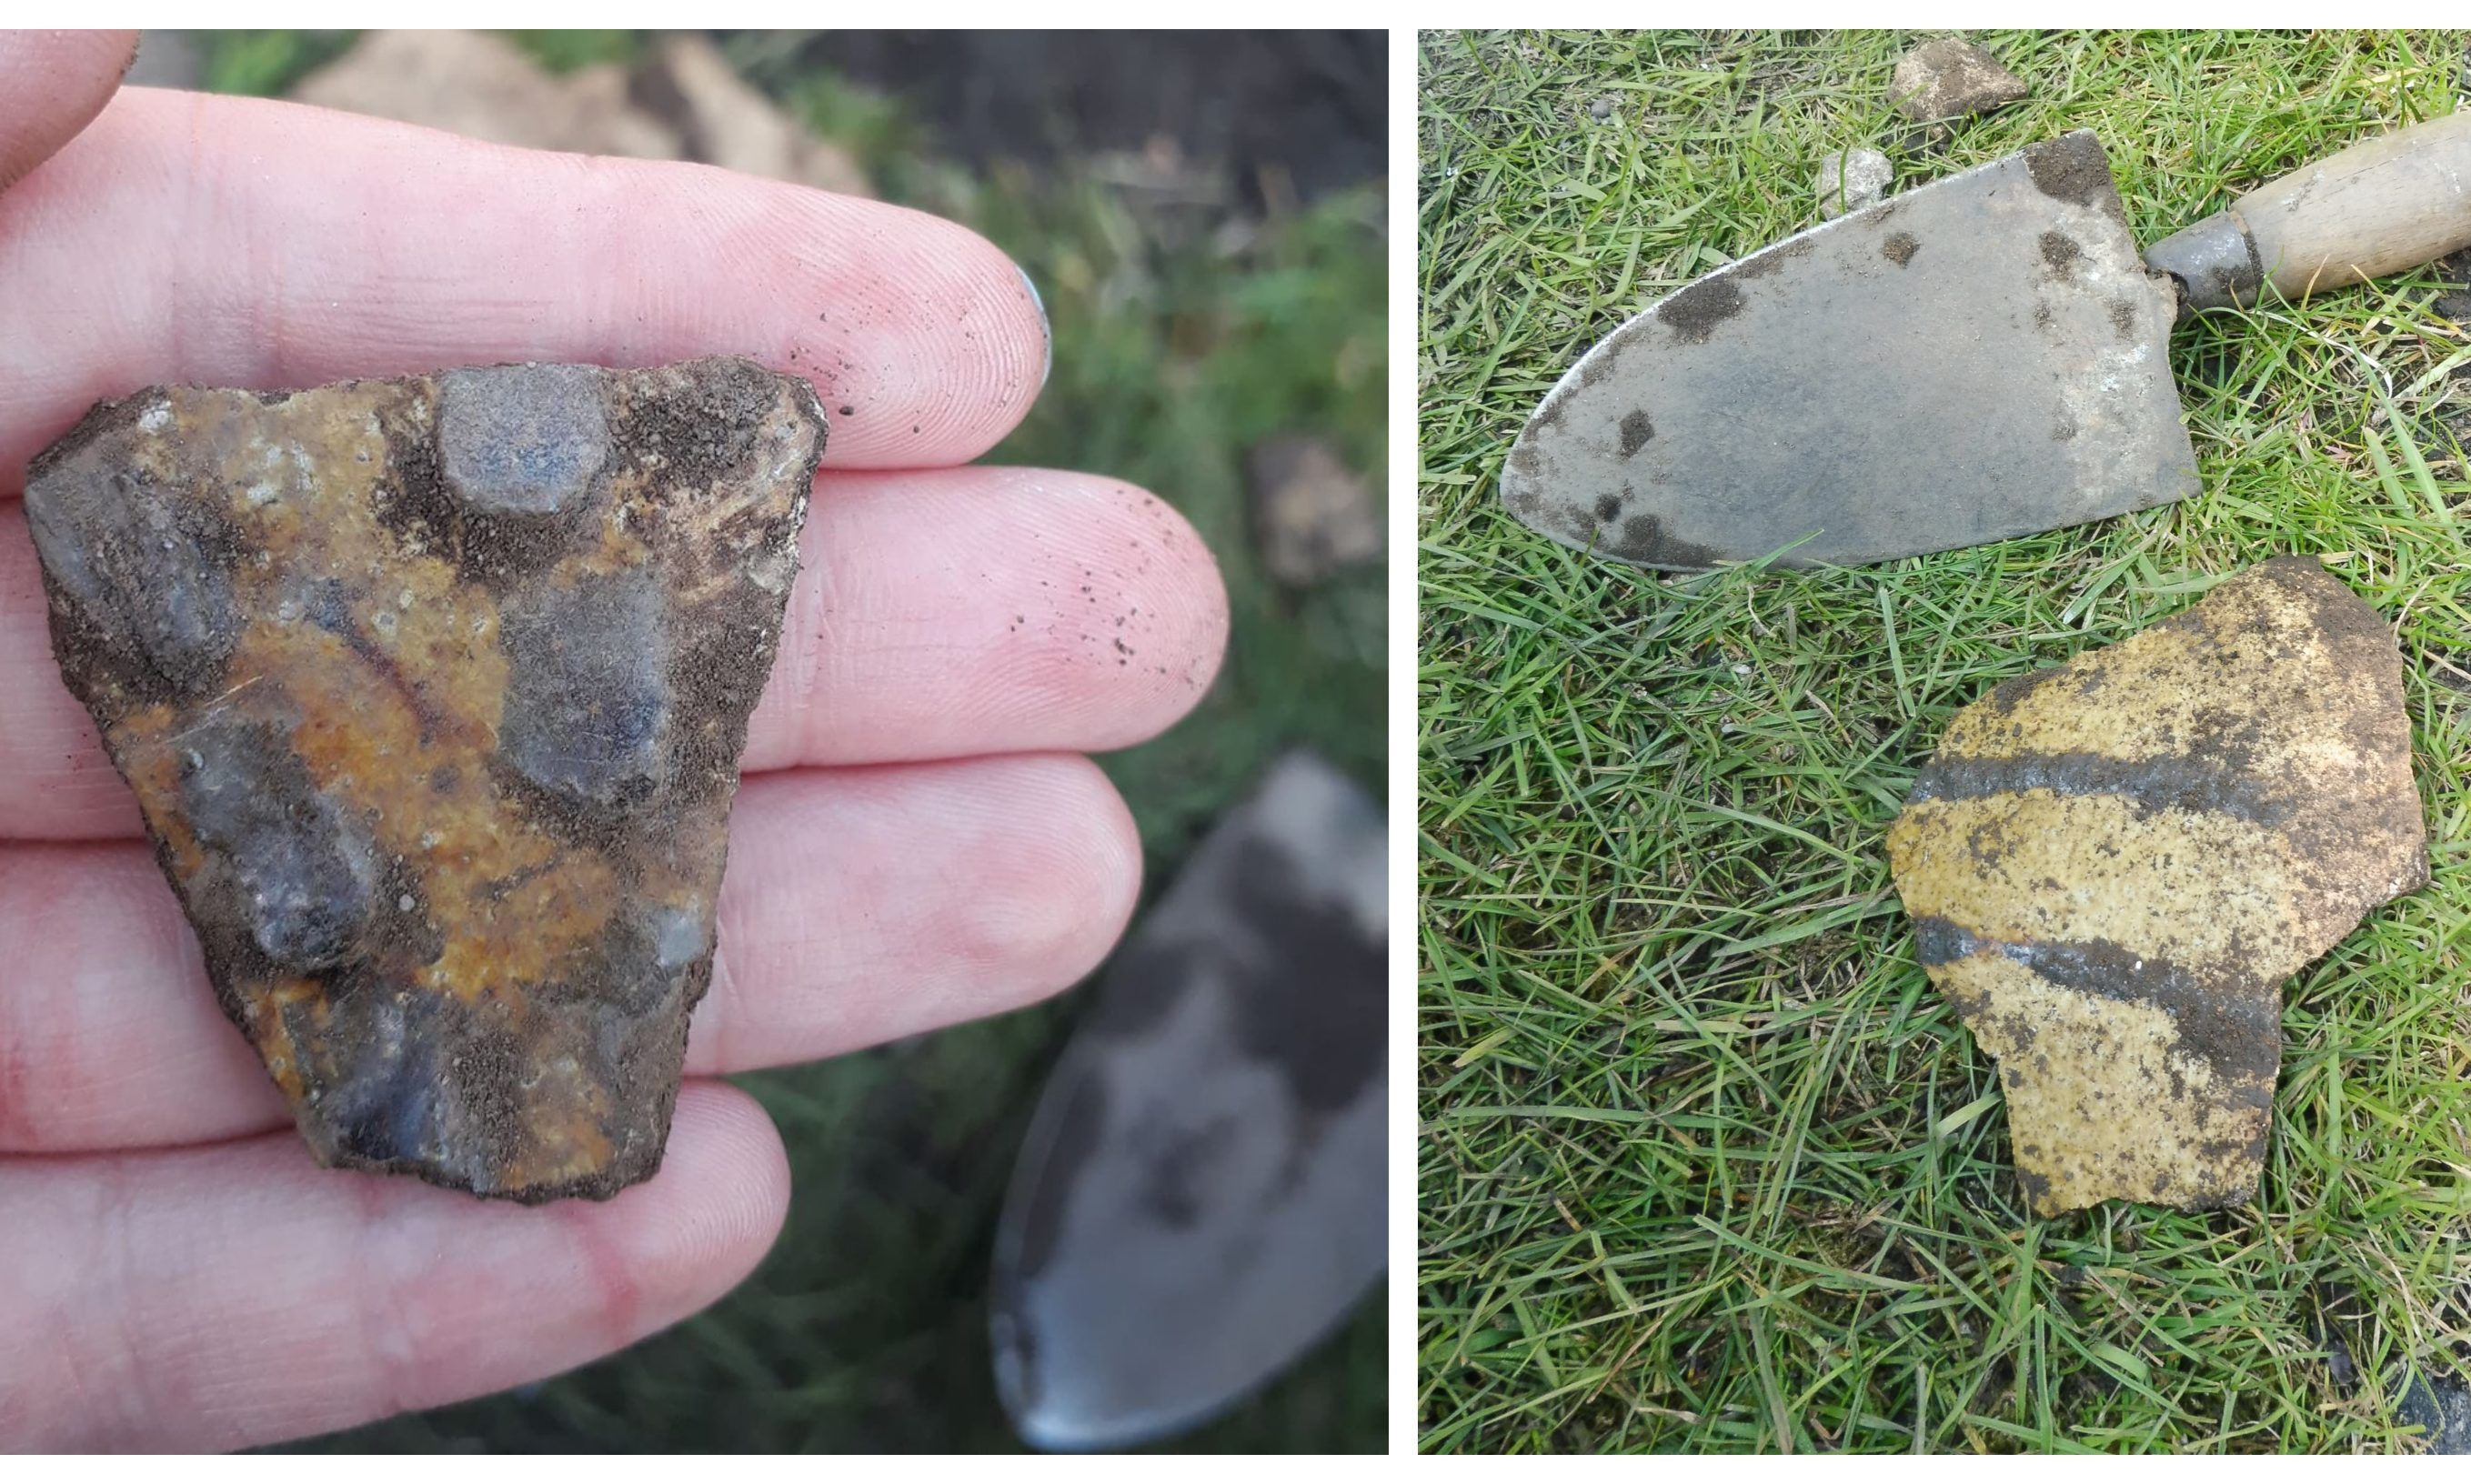 Two of the artefacts found